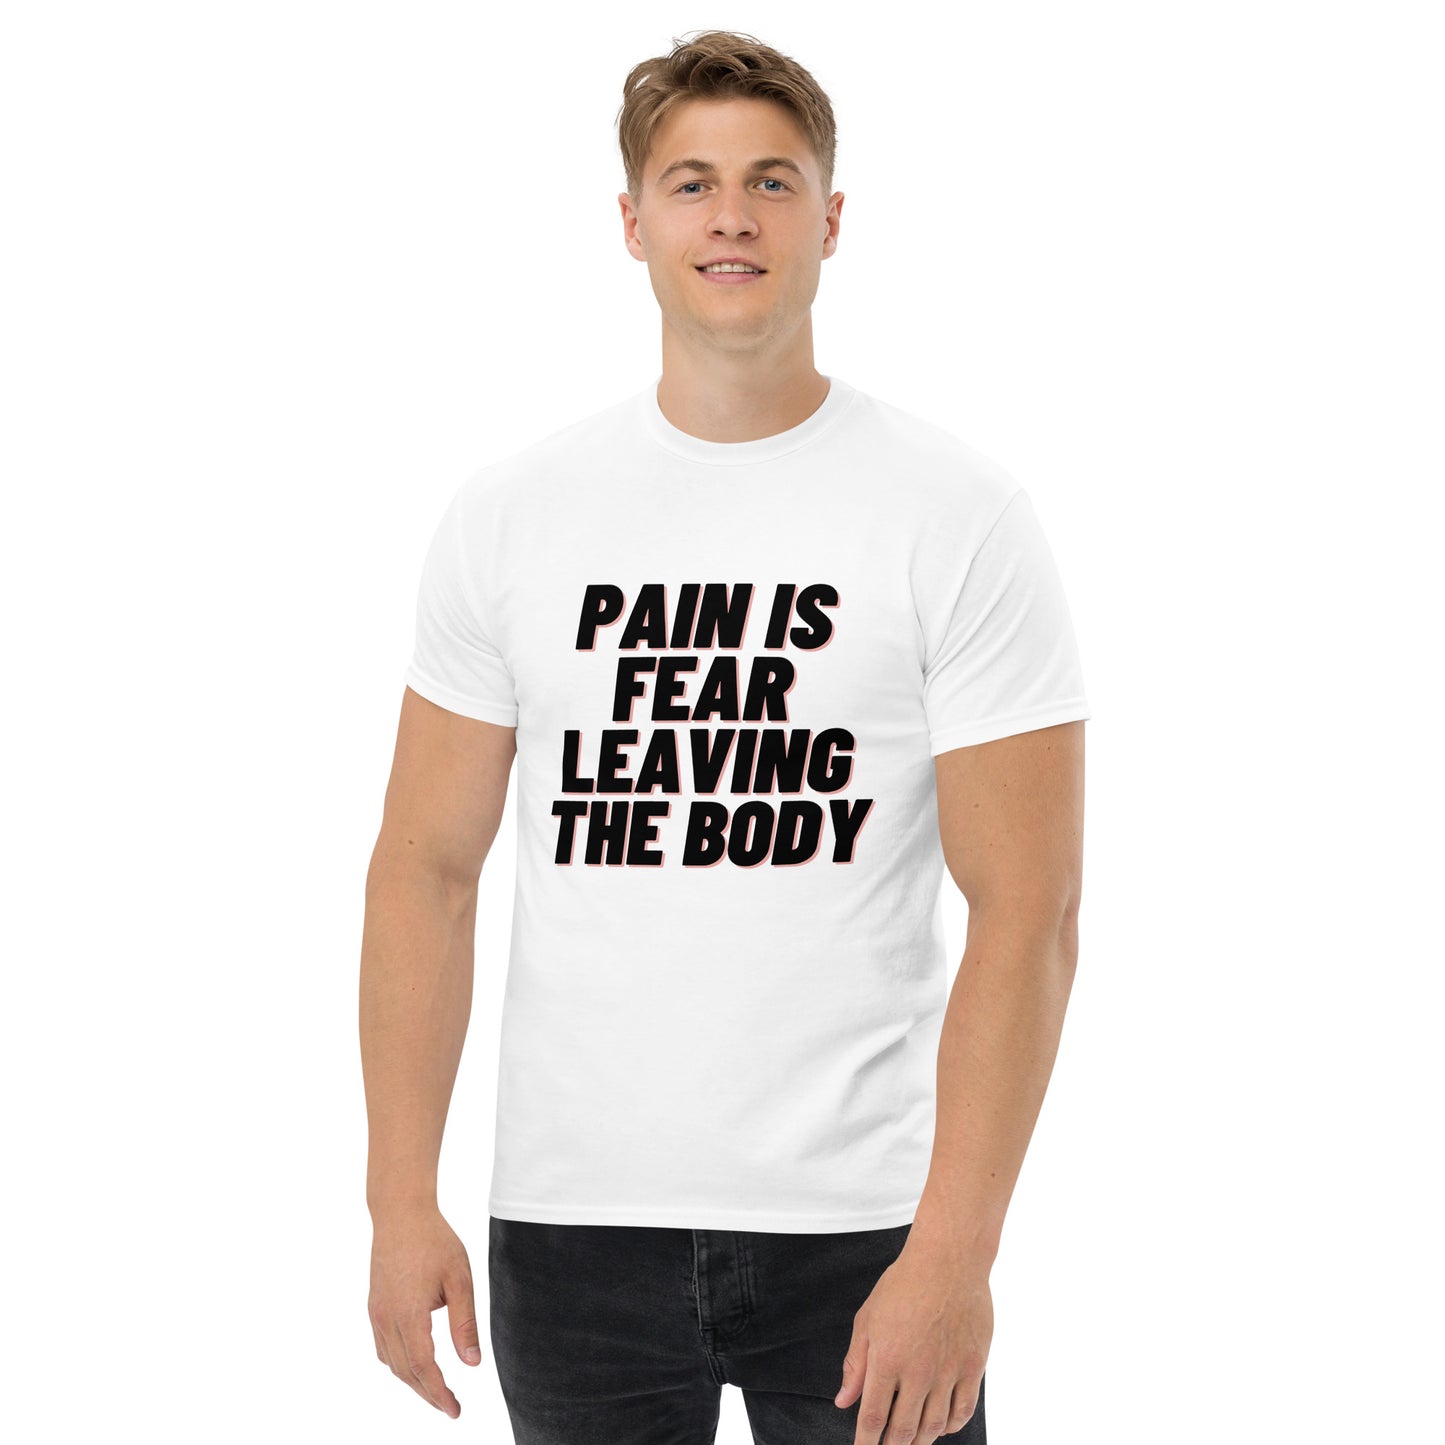 Pain Is Fear Leaving the Body T-Shirt and That's BS!